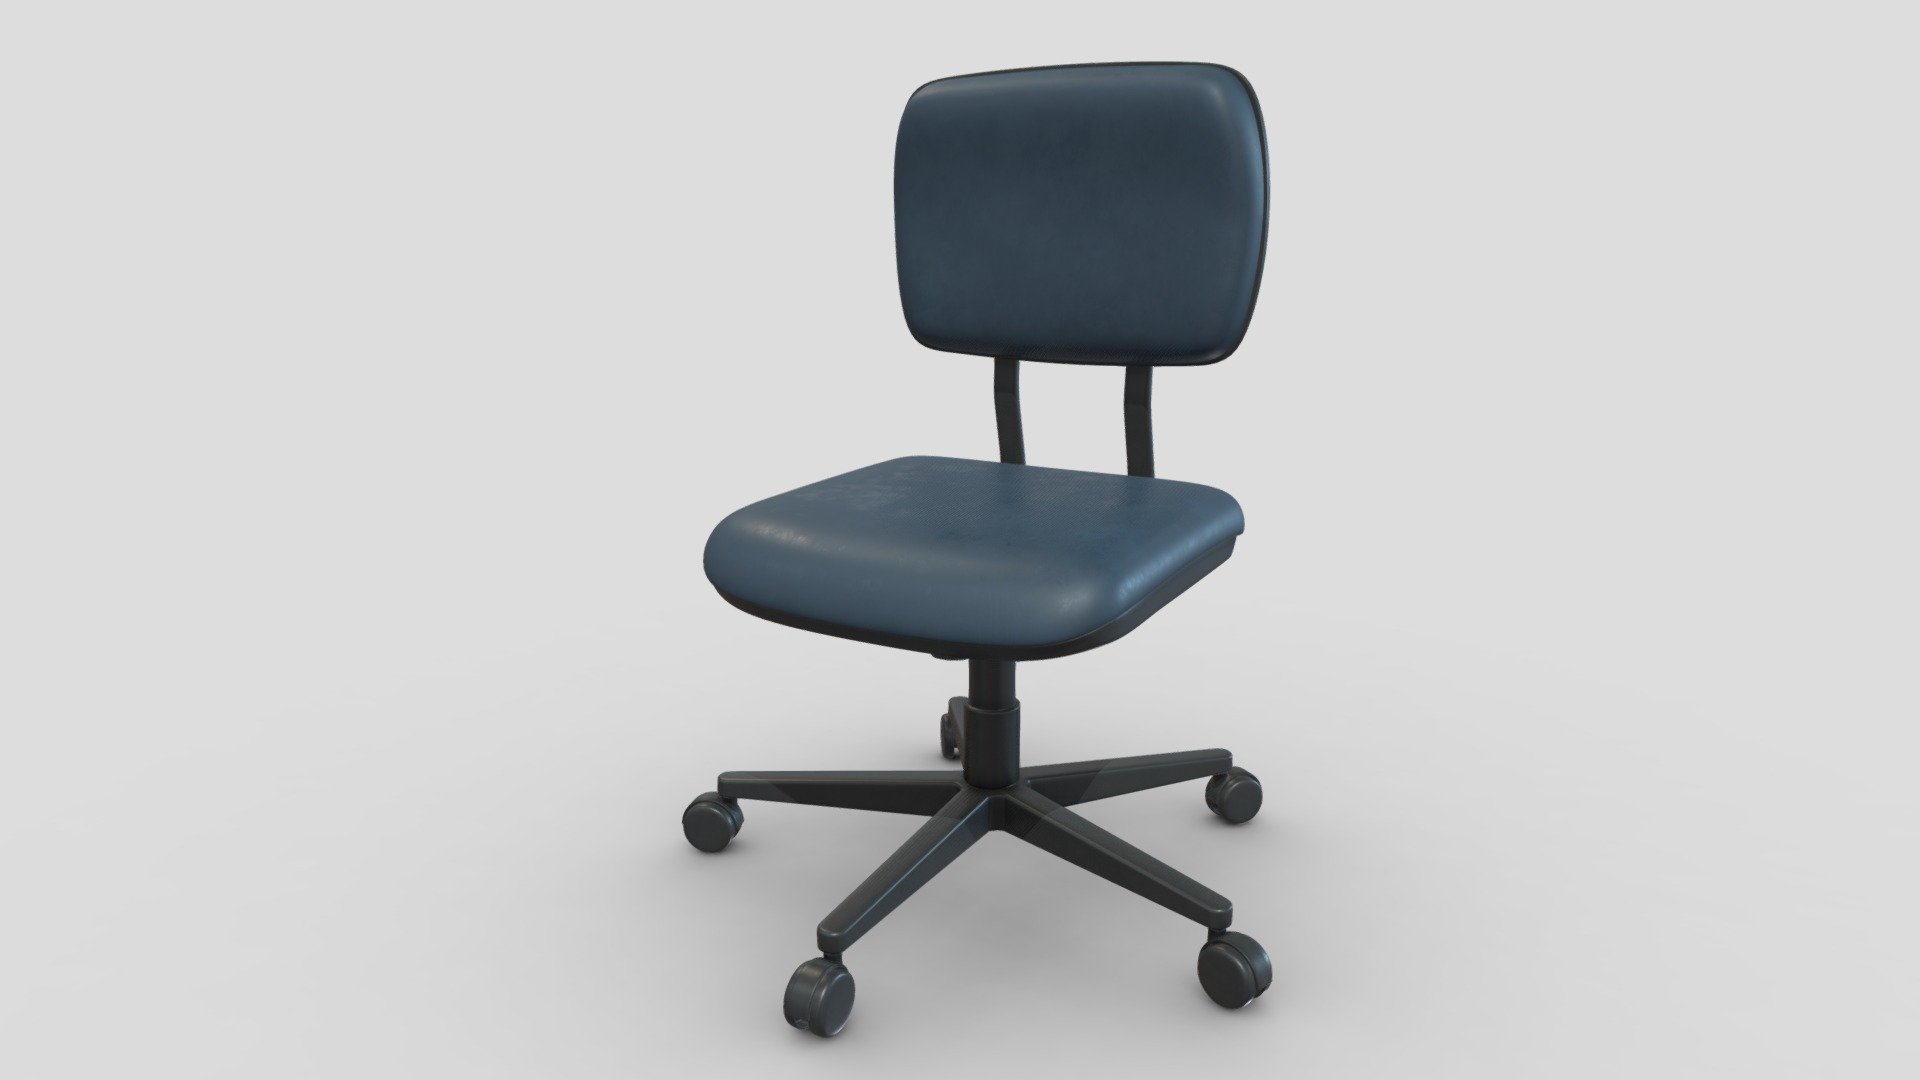 Office Chair modeling and texture.
Subdivision  level 2 
Texture size 4096x4096

the file contain subdive level 0 - Office chair subdiv2 - Buy Royalty Free 3D model by KloWorks 3d model